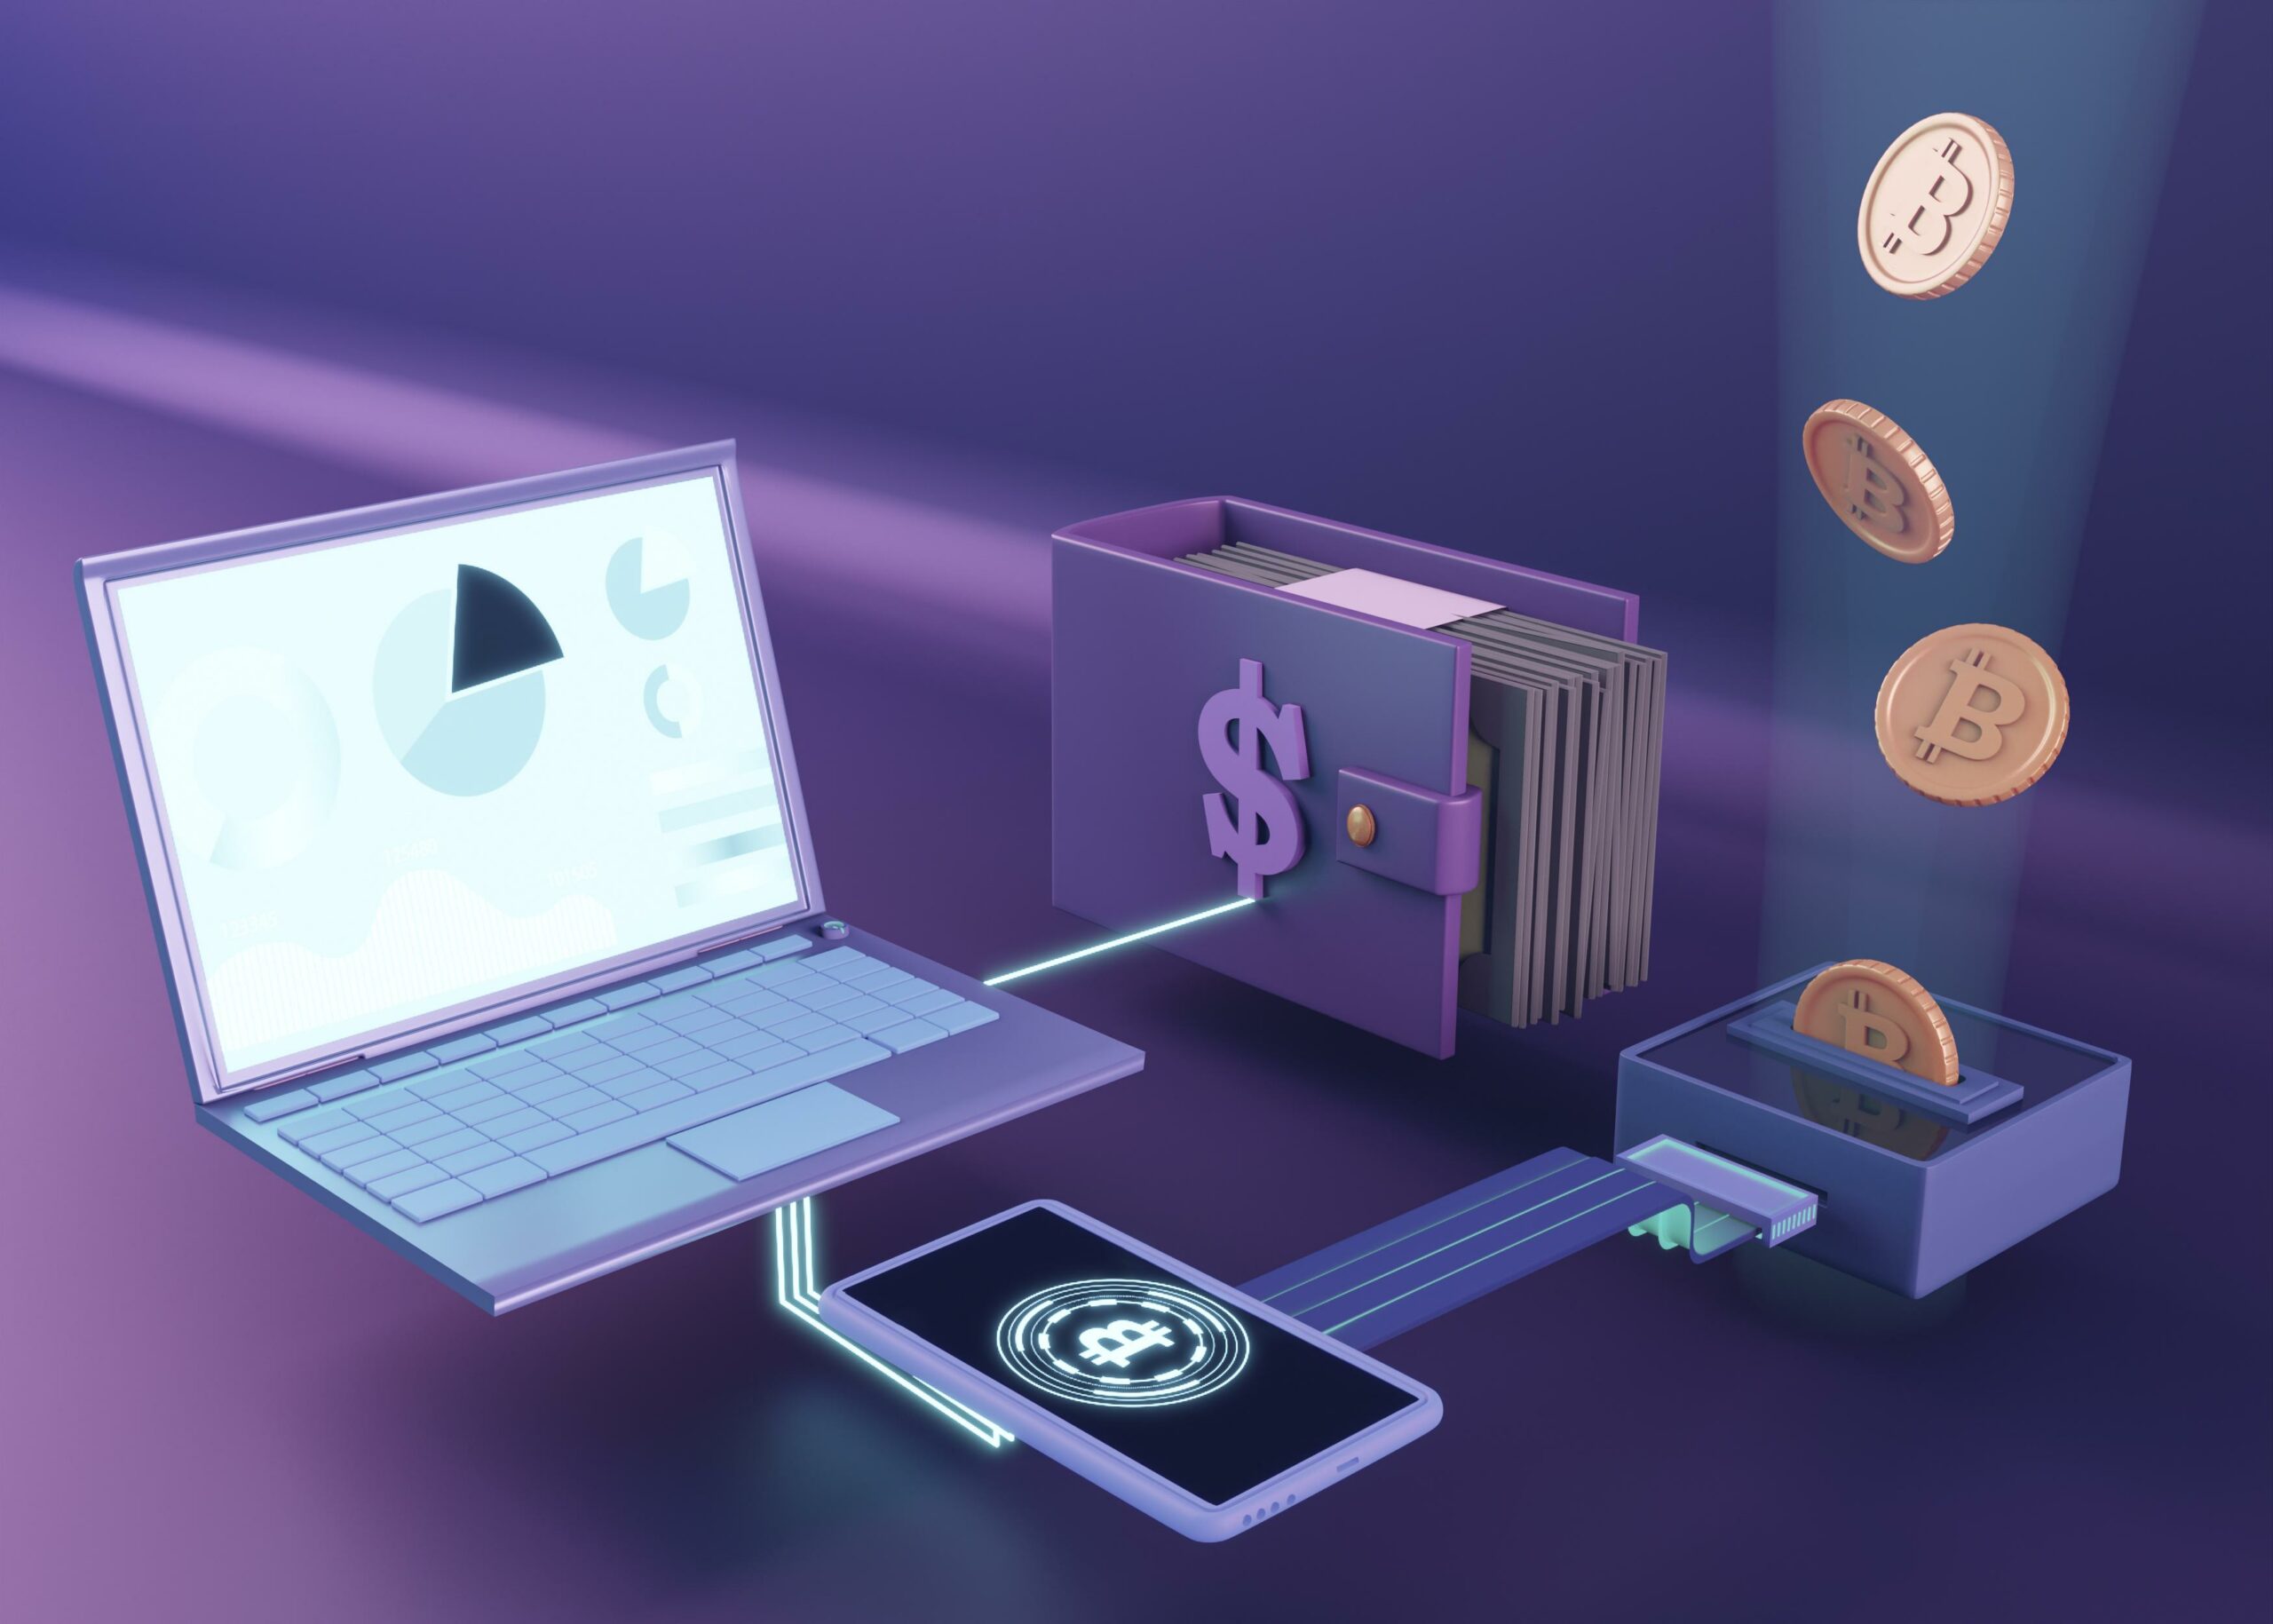 3d illustration on the topic of blockchain and cryptocurrency